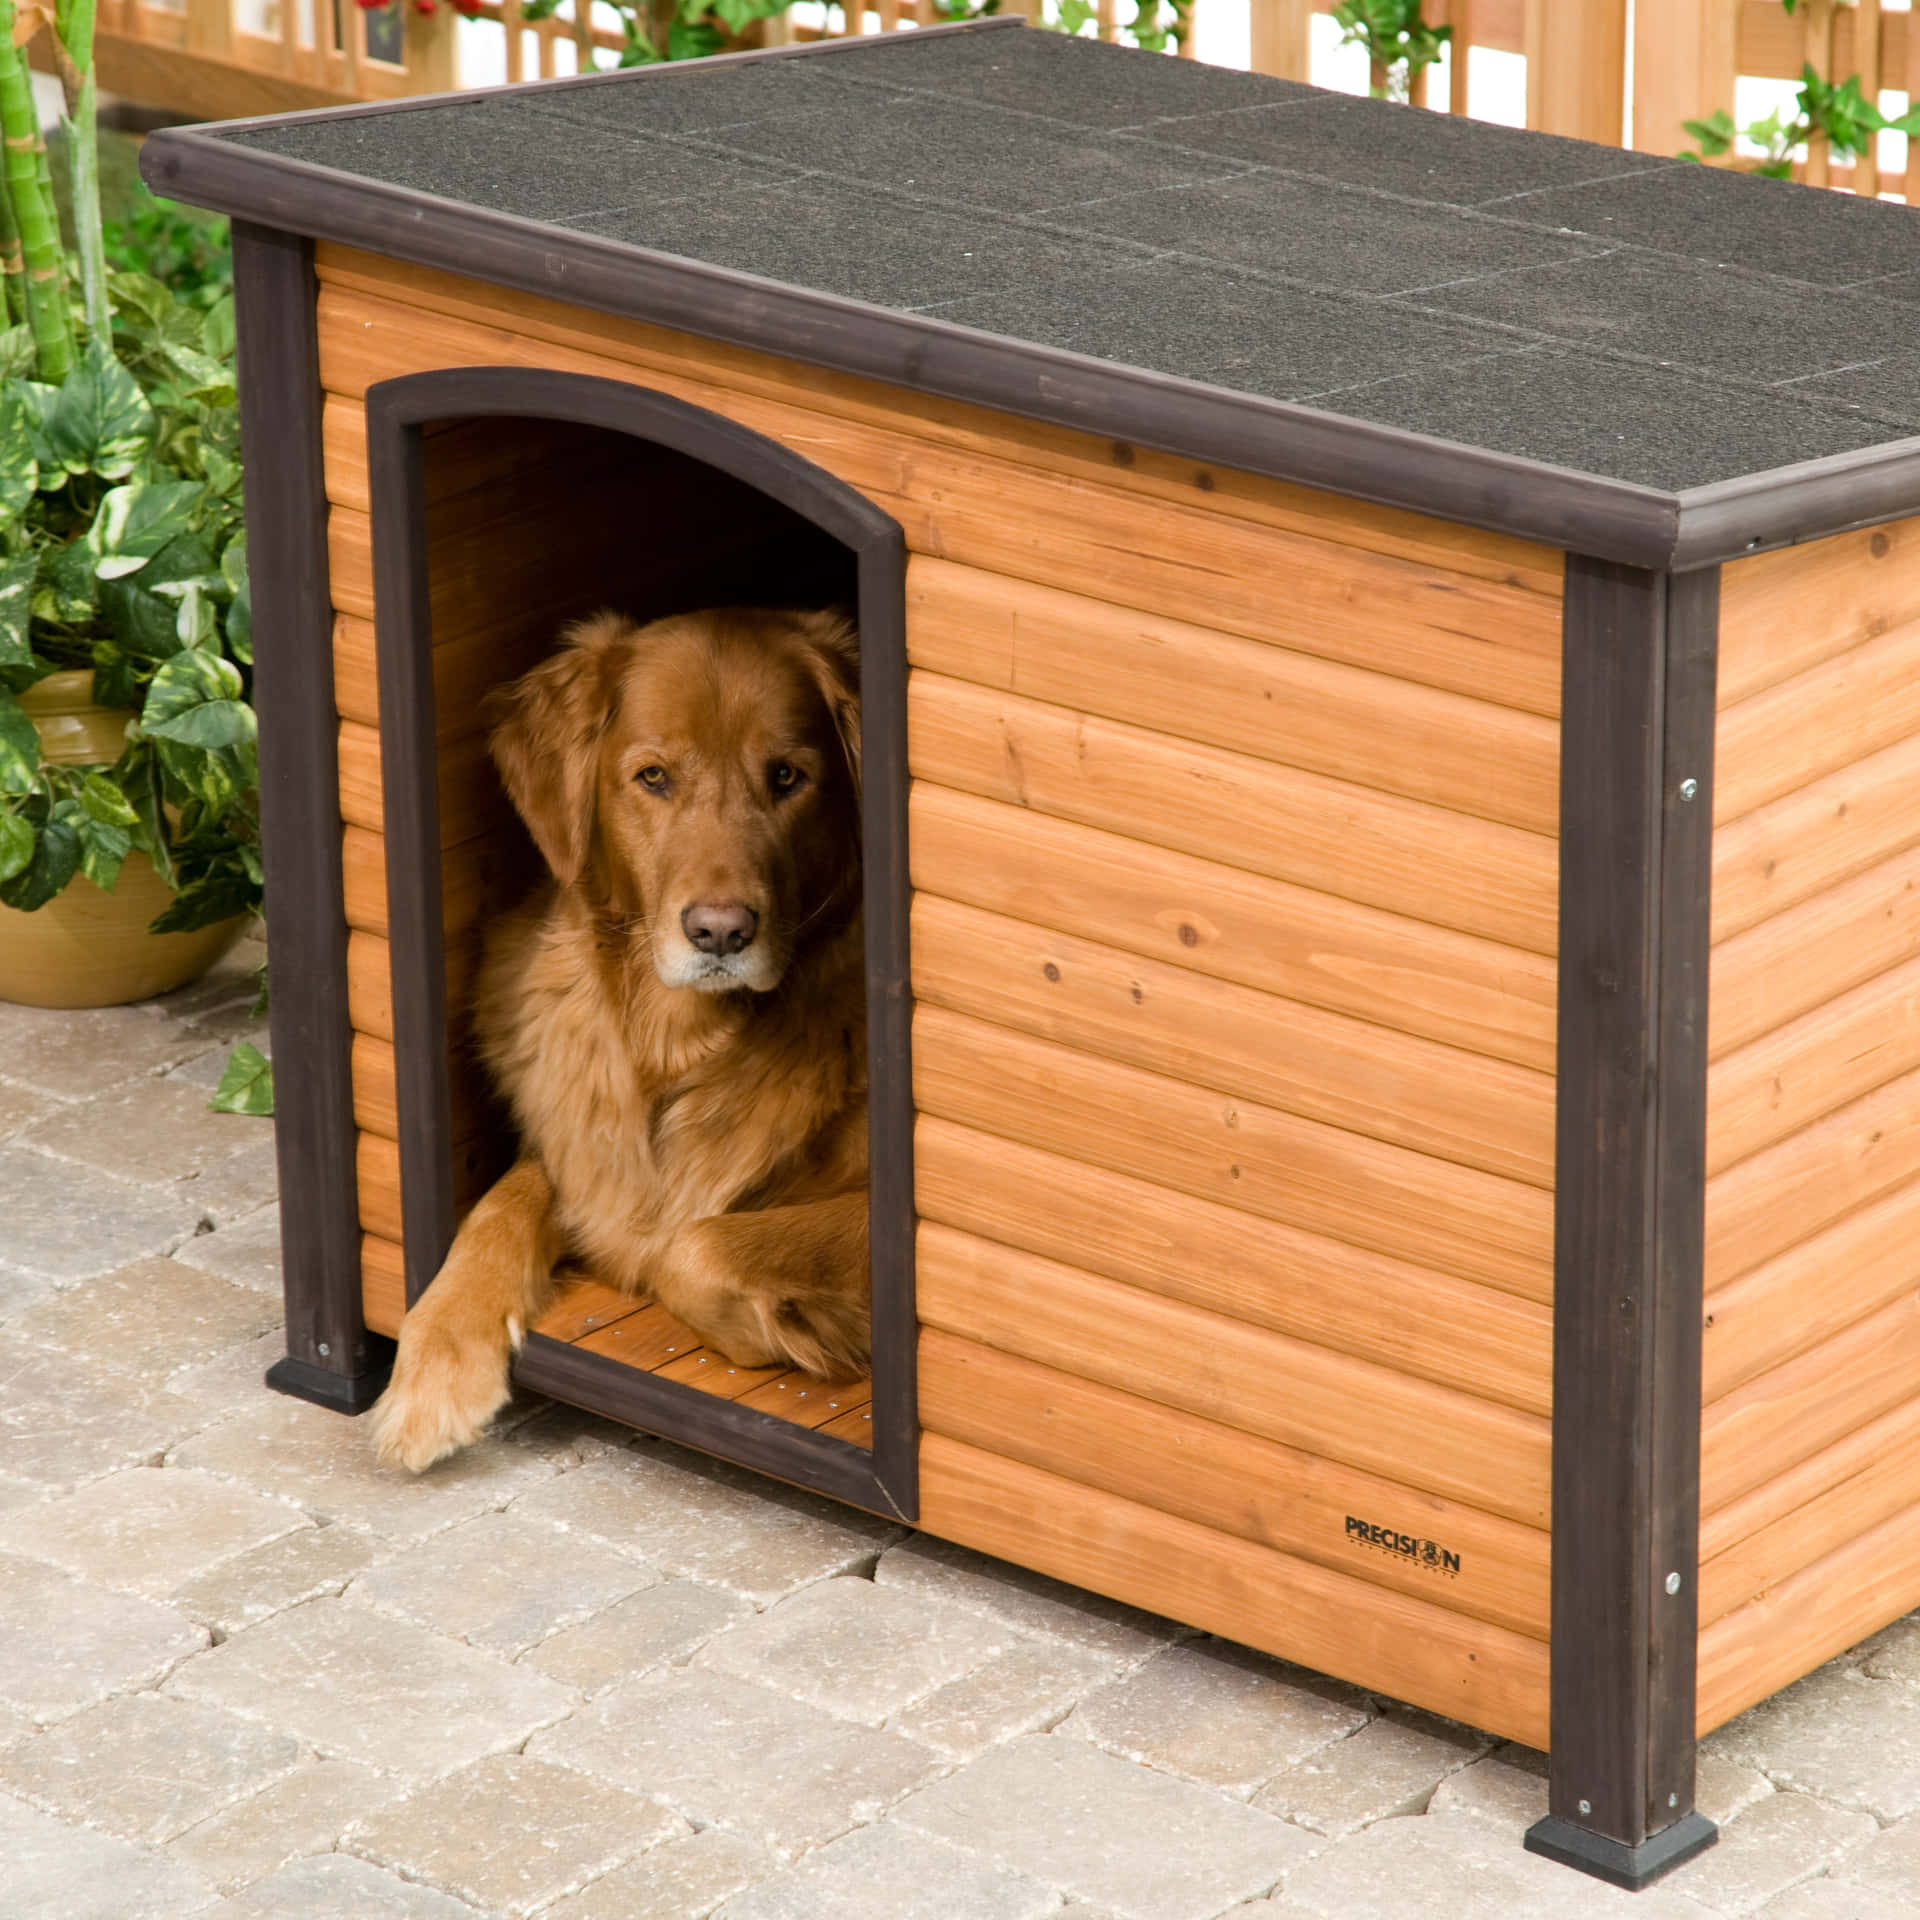 A Sophisticated Wooden Dog House In An Outdoor Setting Wallpaper